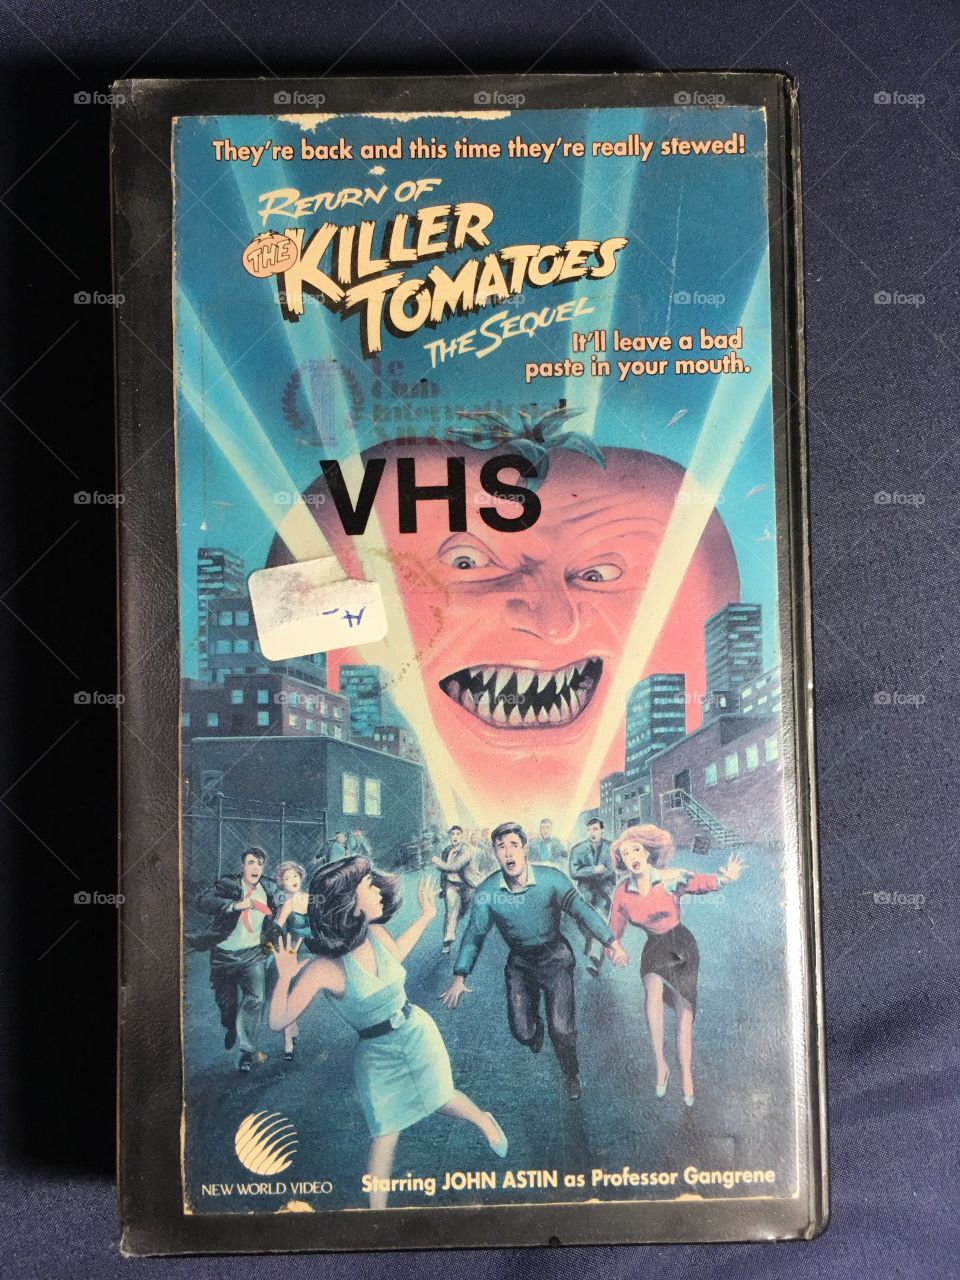 Return of the killer tomatoes the sequel vhs movie 